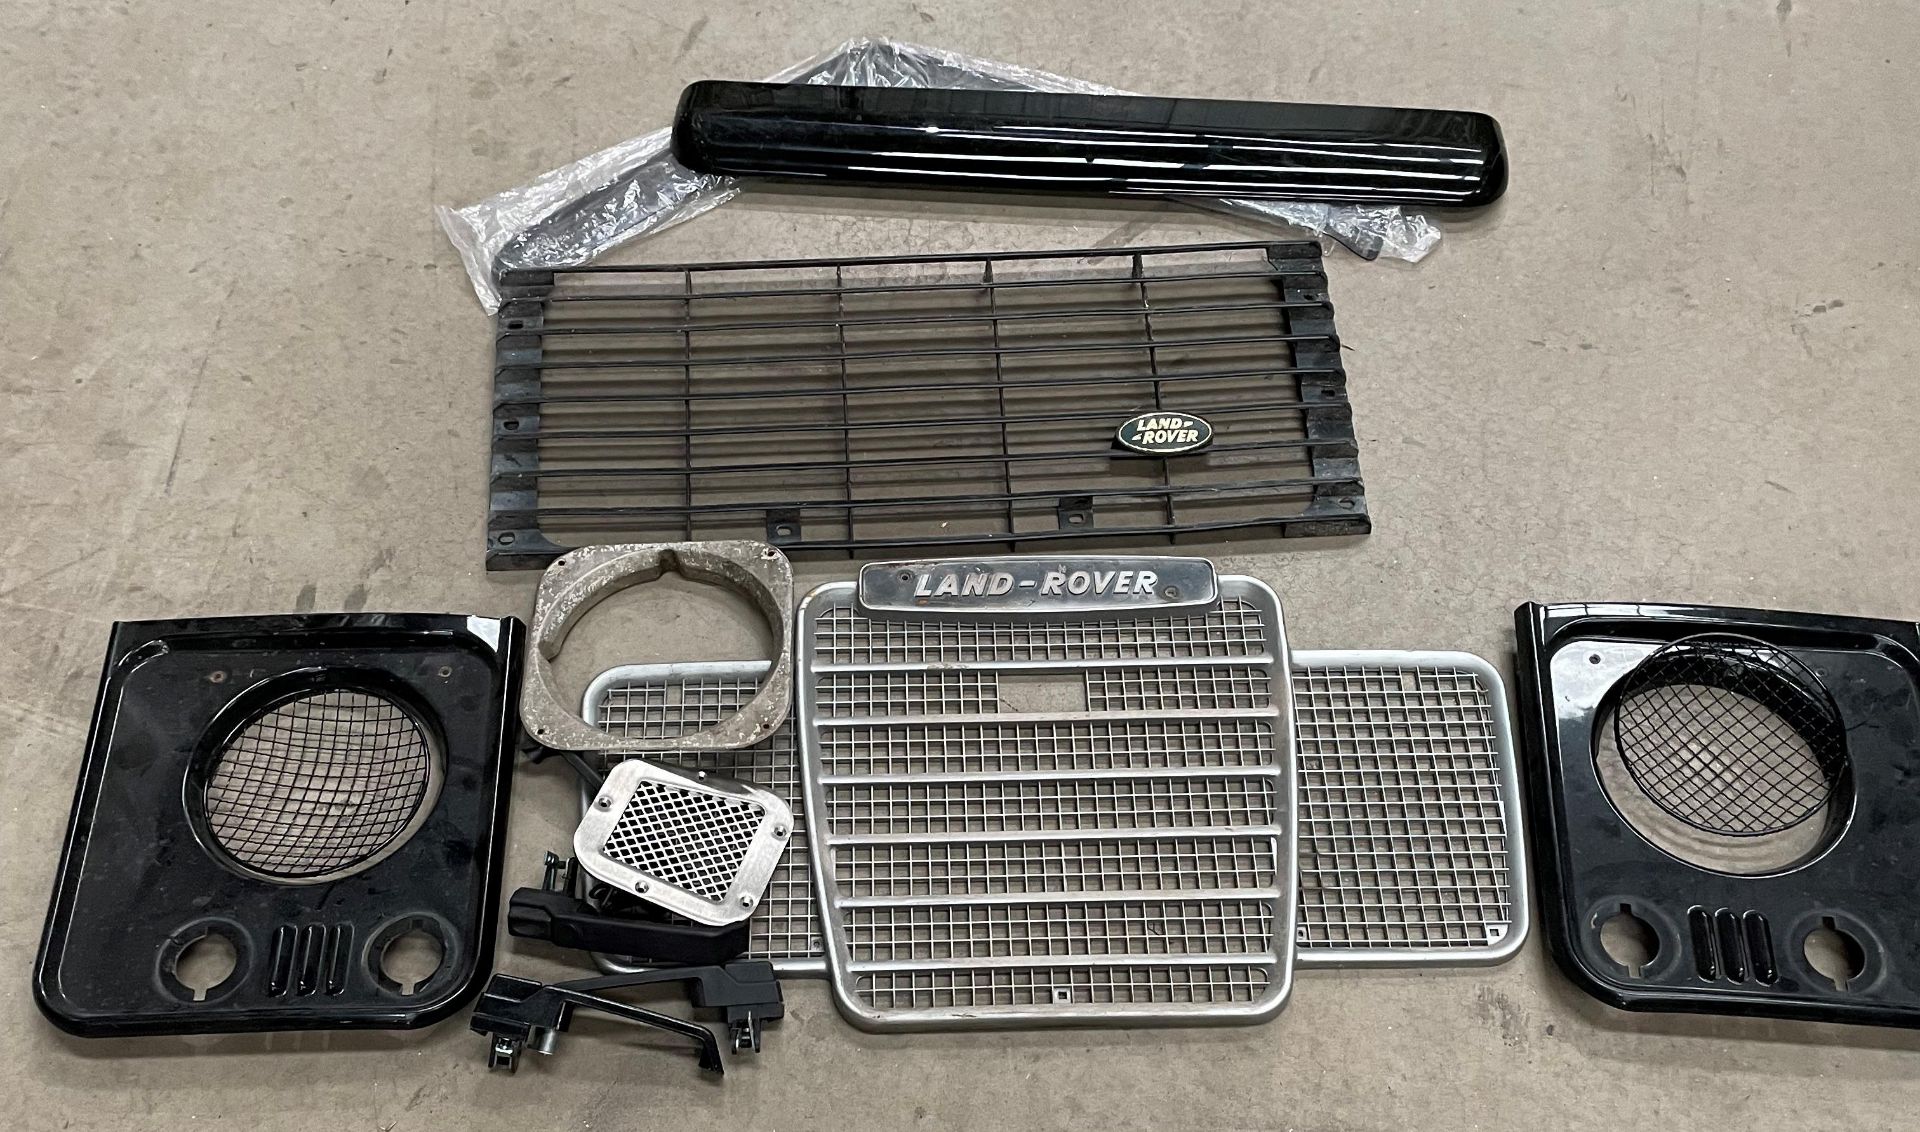 2 x Land Rover grills,